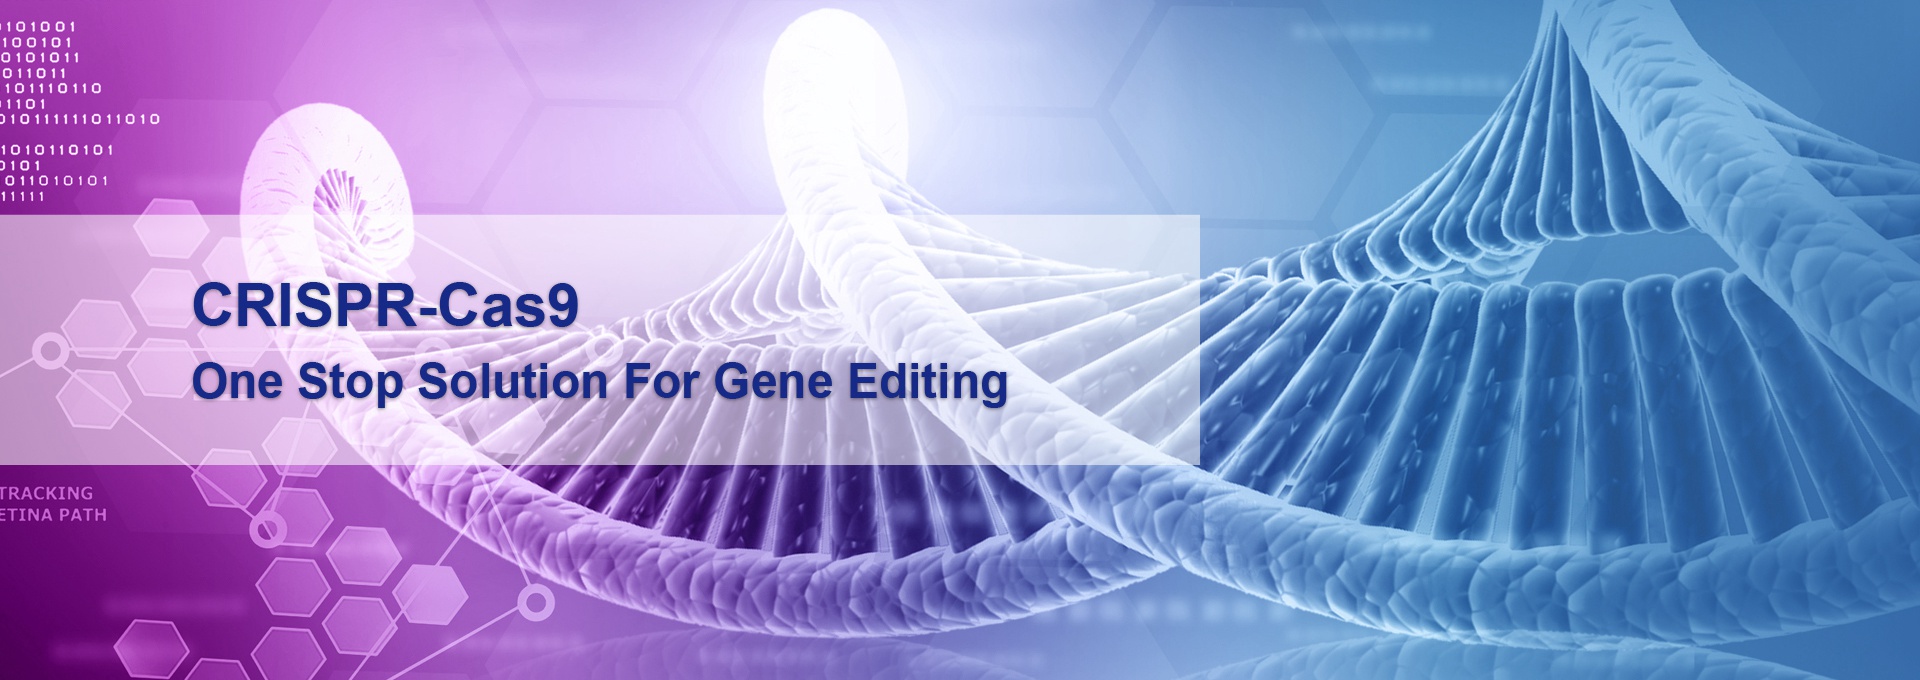 One stop solution for gene editing using our unique CRISPR/Cas9 Technology